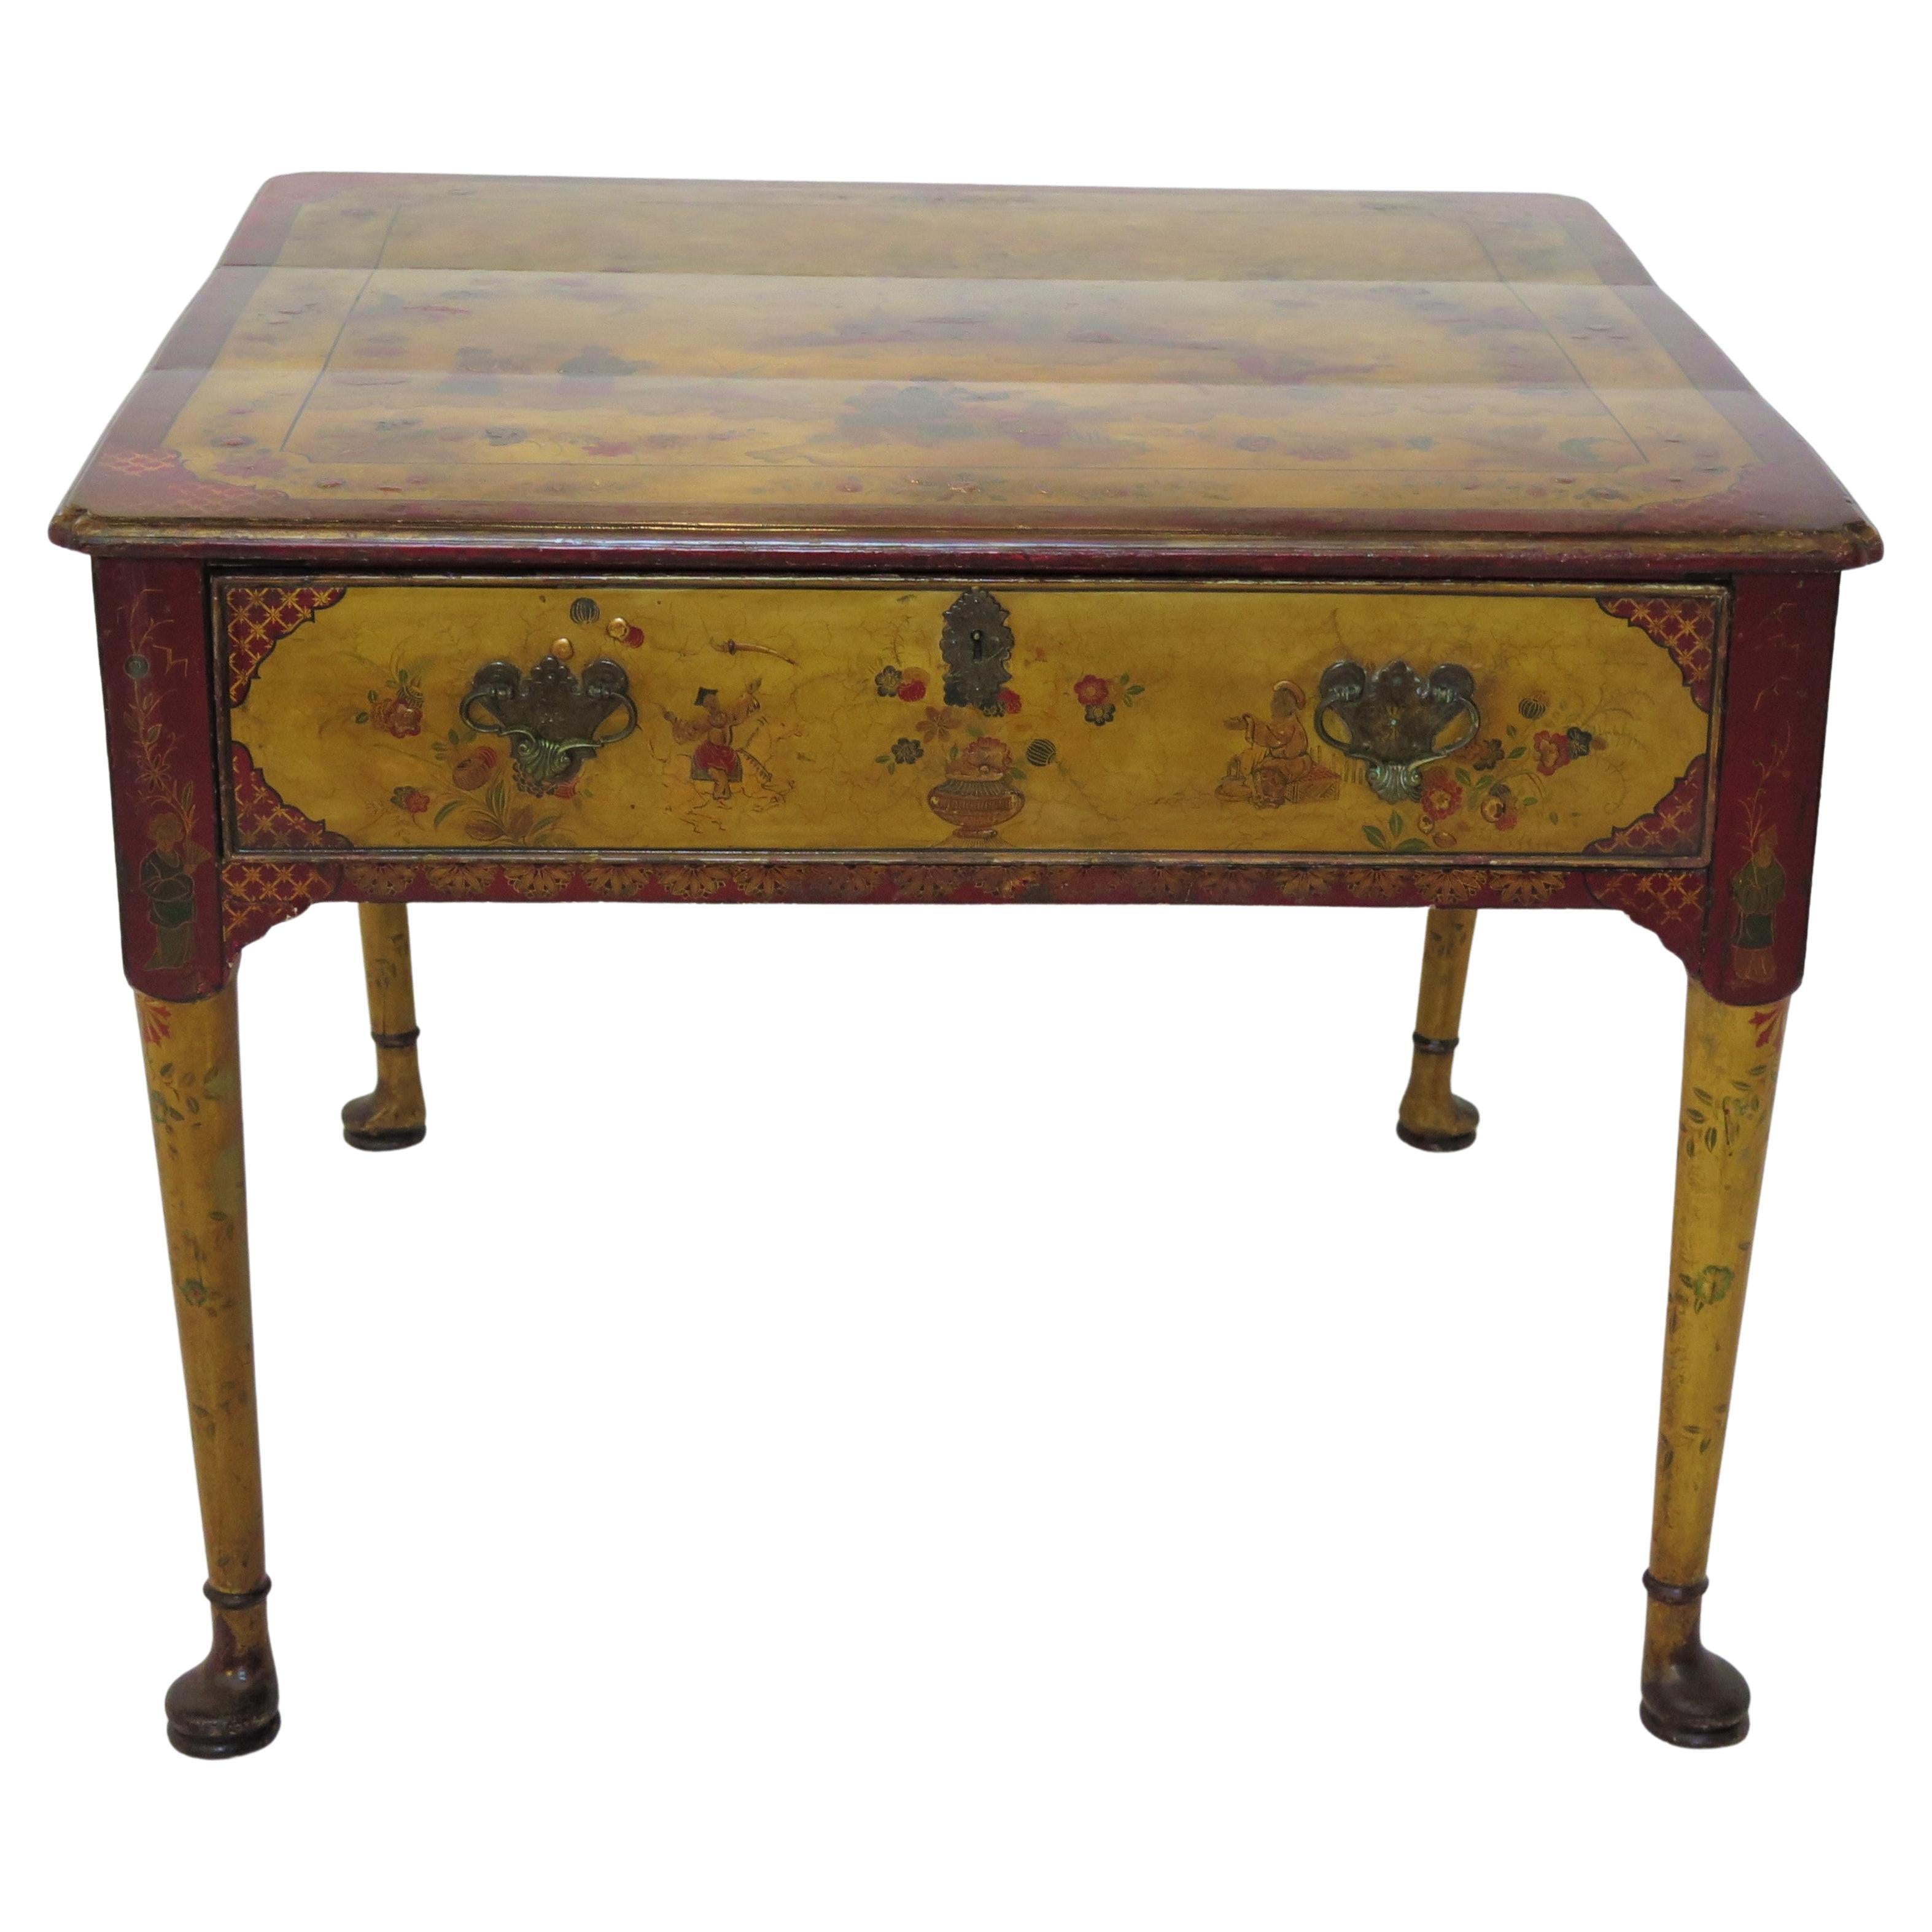 Queen Anne Rent Table "in the Chinese Taste" For Sale